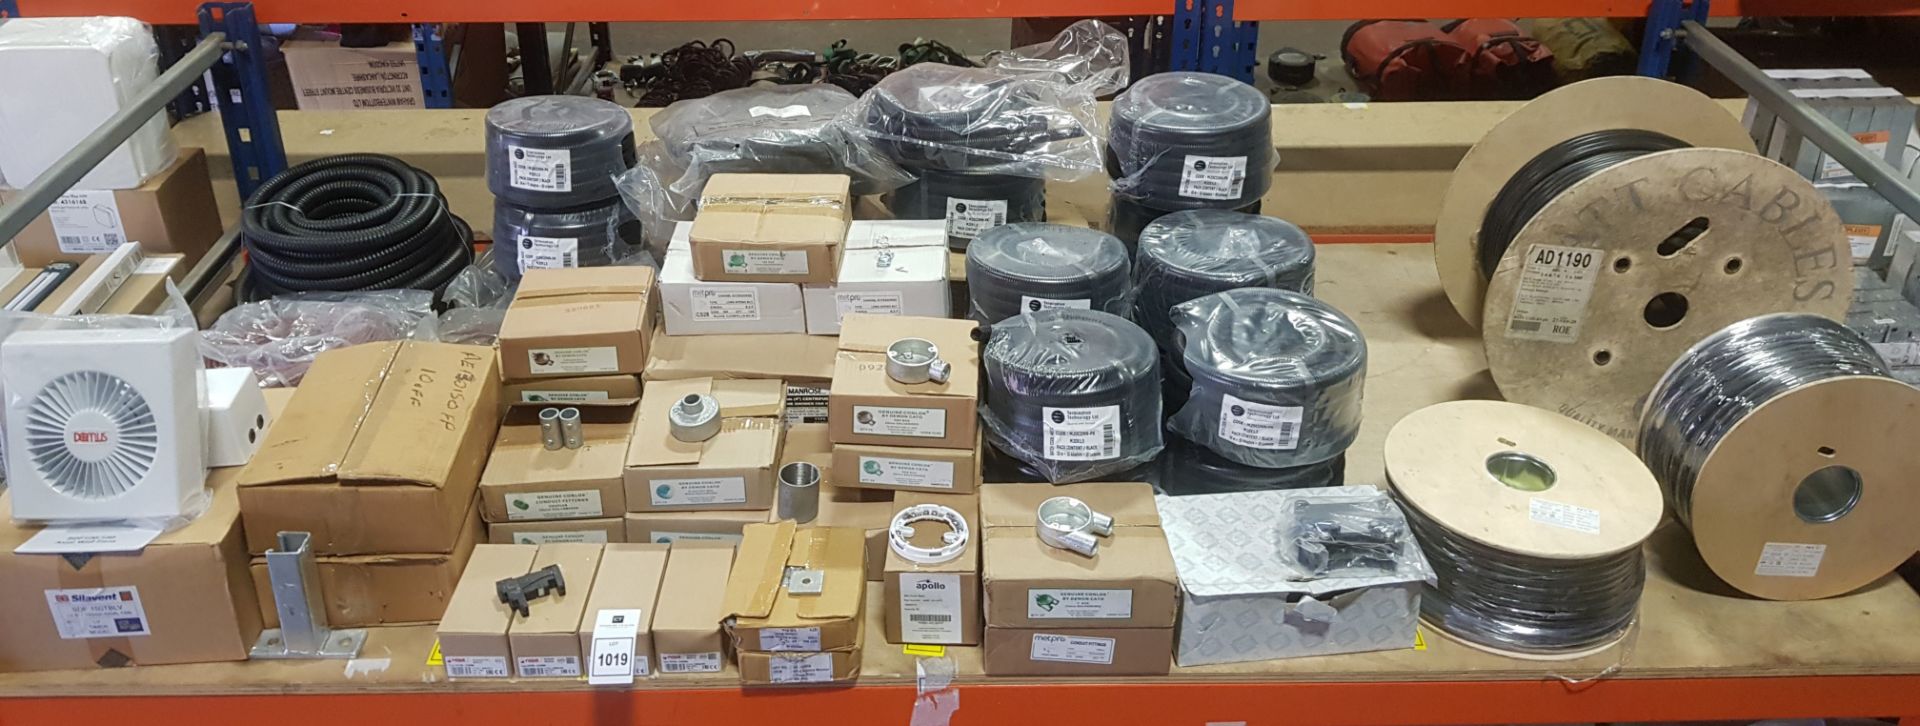 200 + PIECE BRAND NEW COMMERCIAL / HOMEWARE ELECTRICAL ITEMS TO INCLUDE 100M CLASS 1 4G 2.5 SQMM